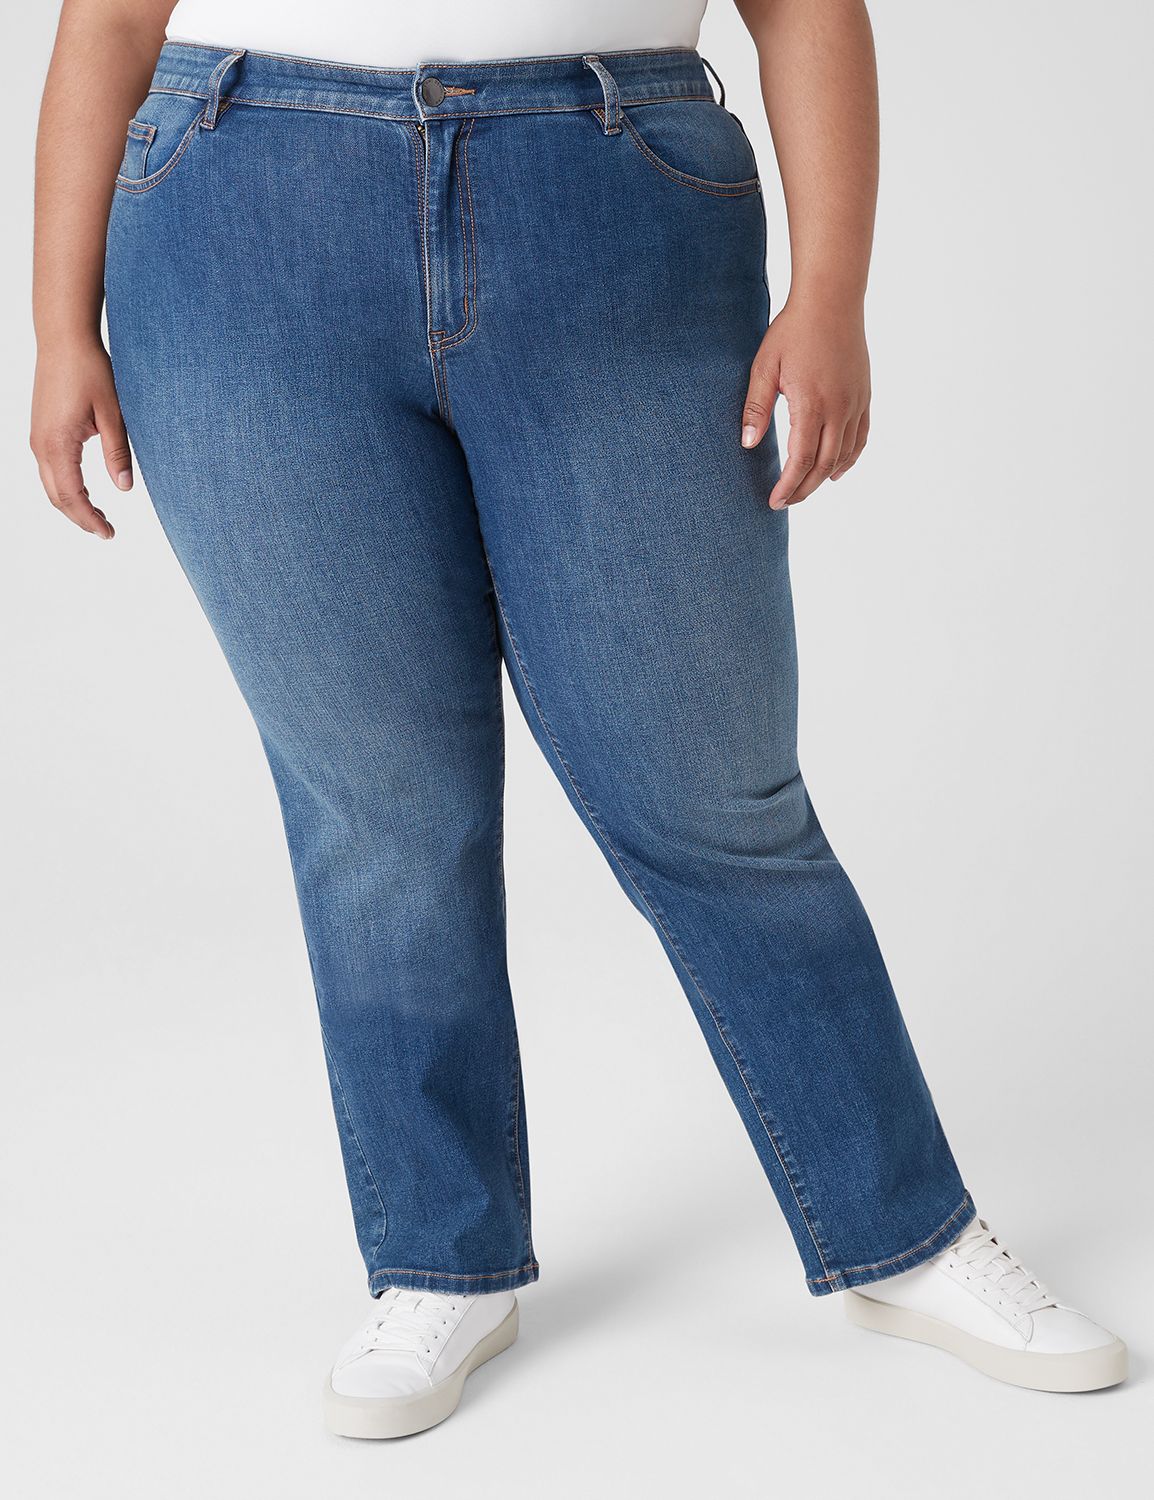 Lane Bryant Solid Blue Jeggings Size 22 (Plus) - 51% off